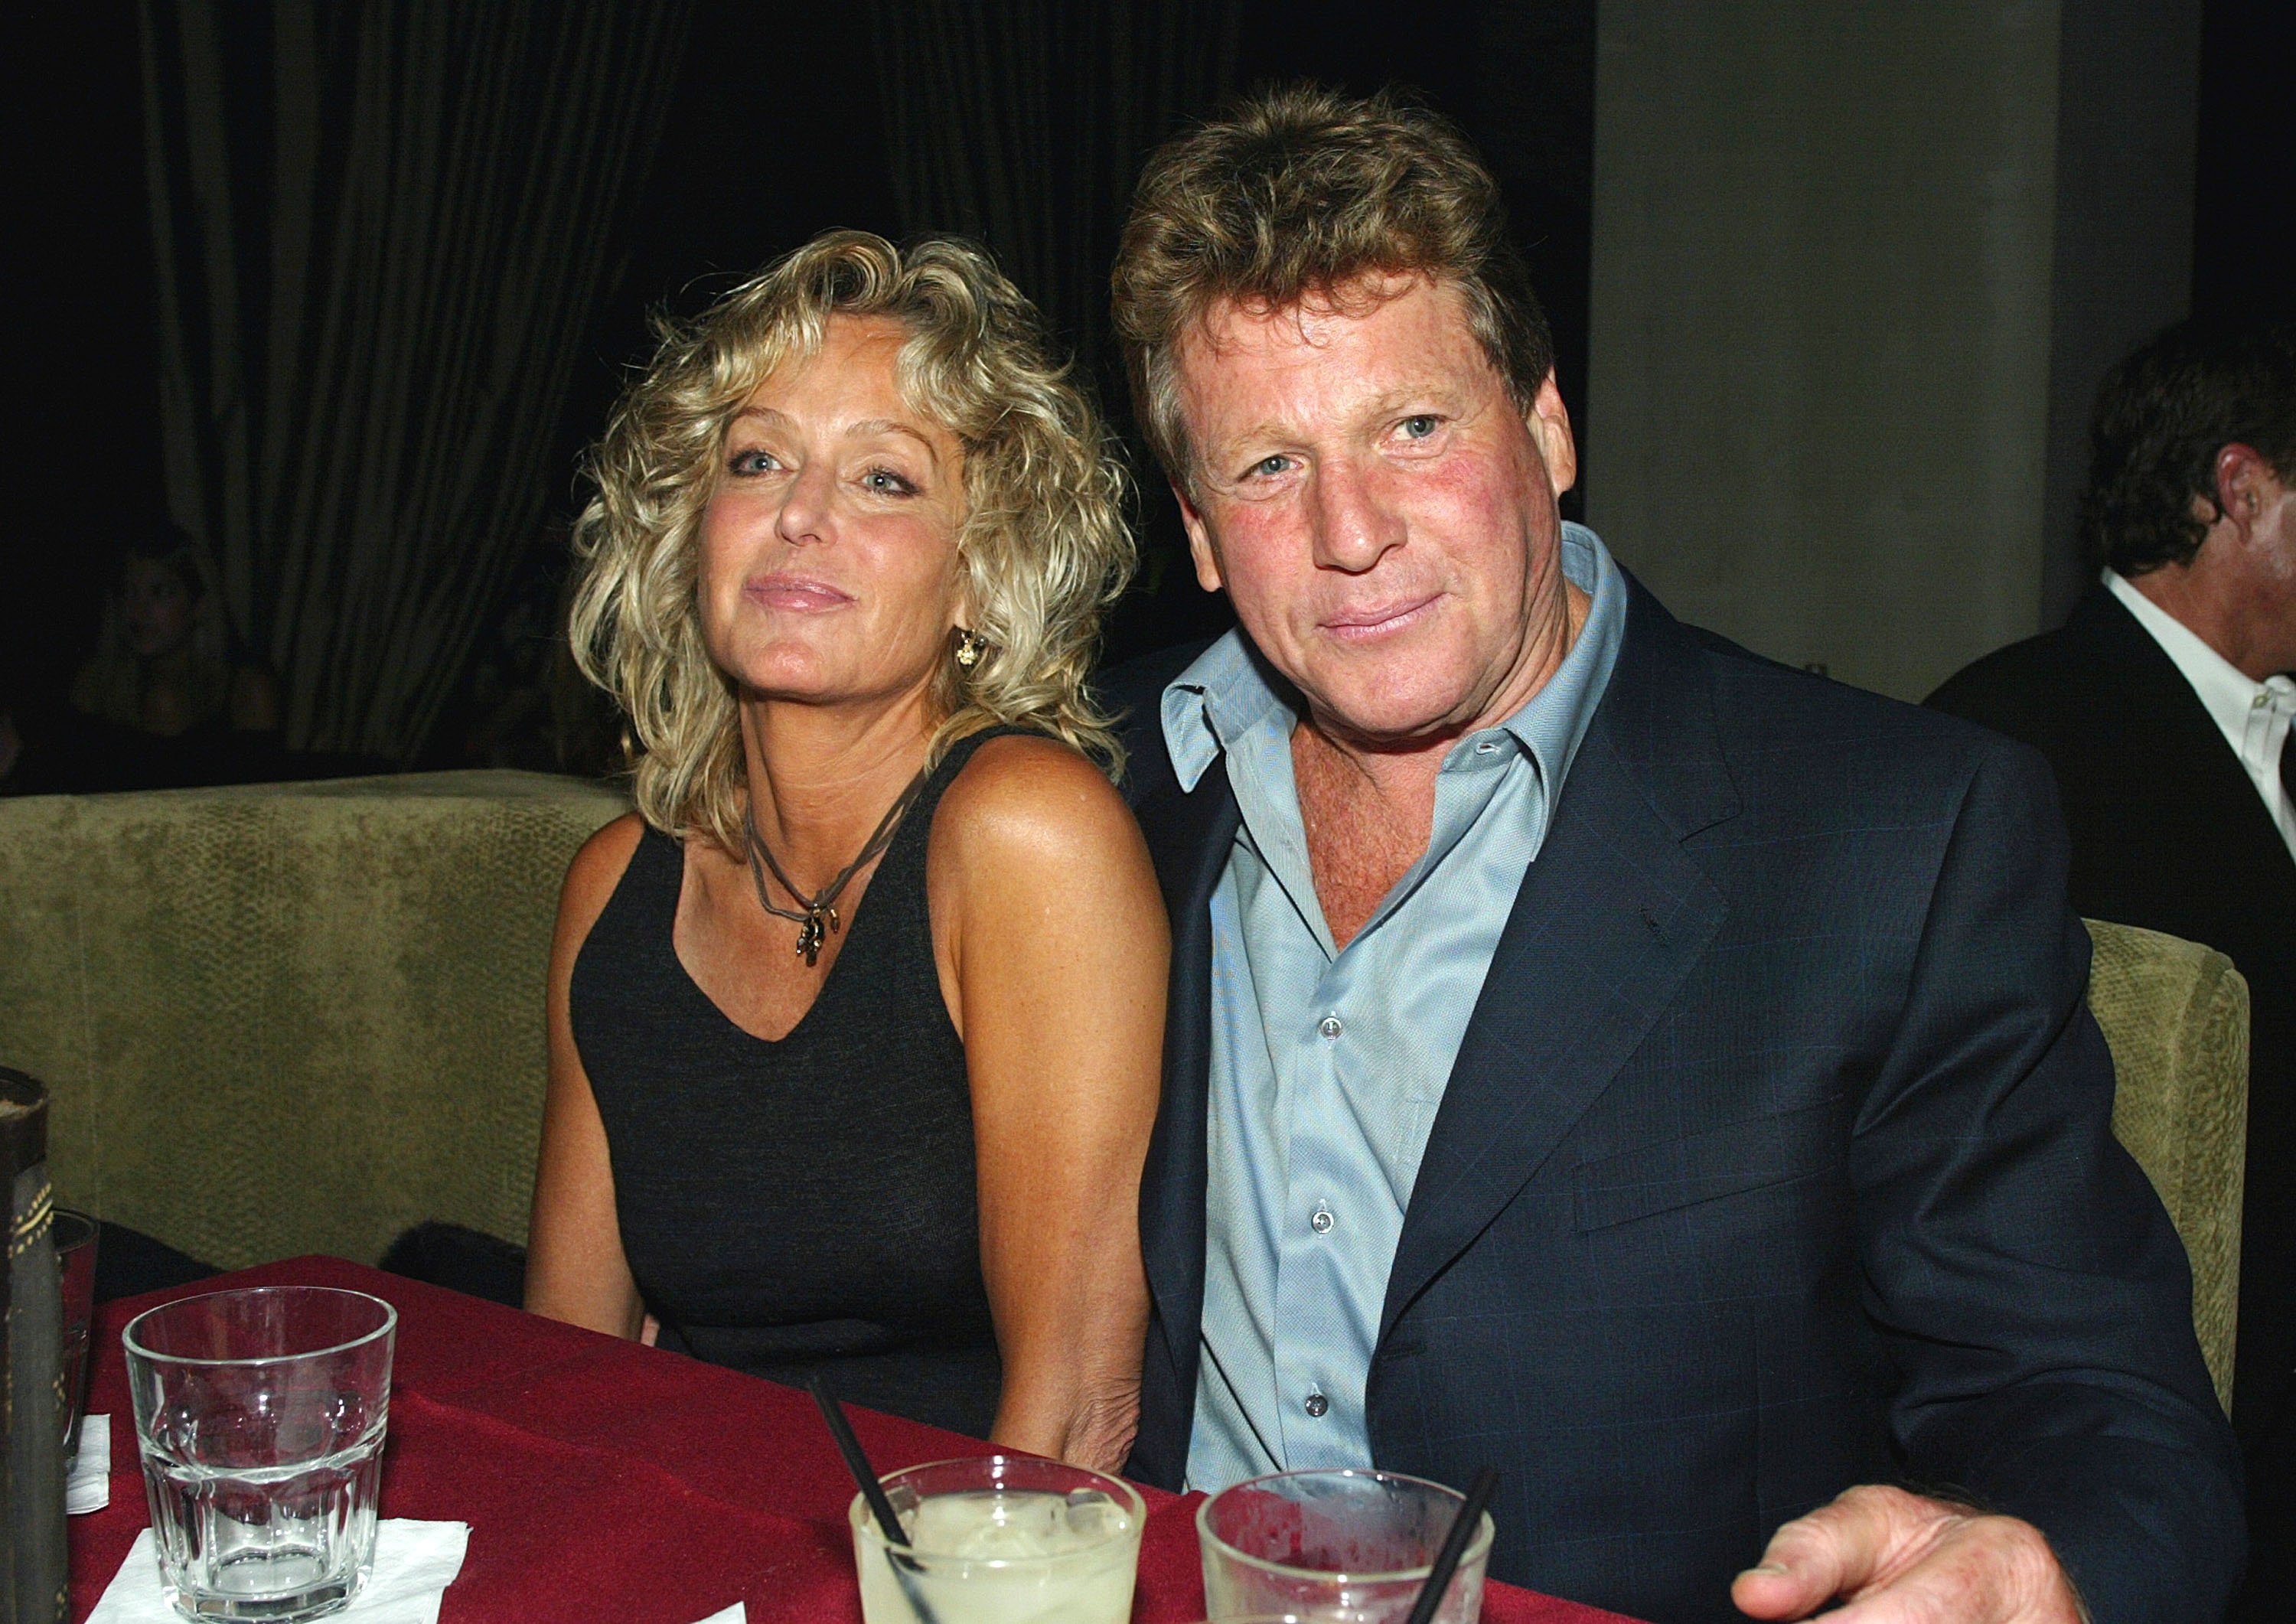 Farrah Fawcett and Ryan O'Neal at the after-party for "Malibu's Most Wanted" on April 10, 2003 | Photo: GettyImages